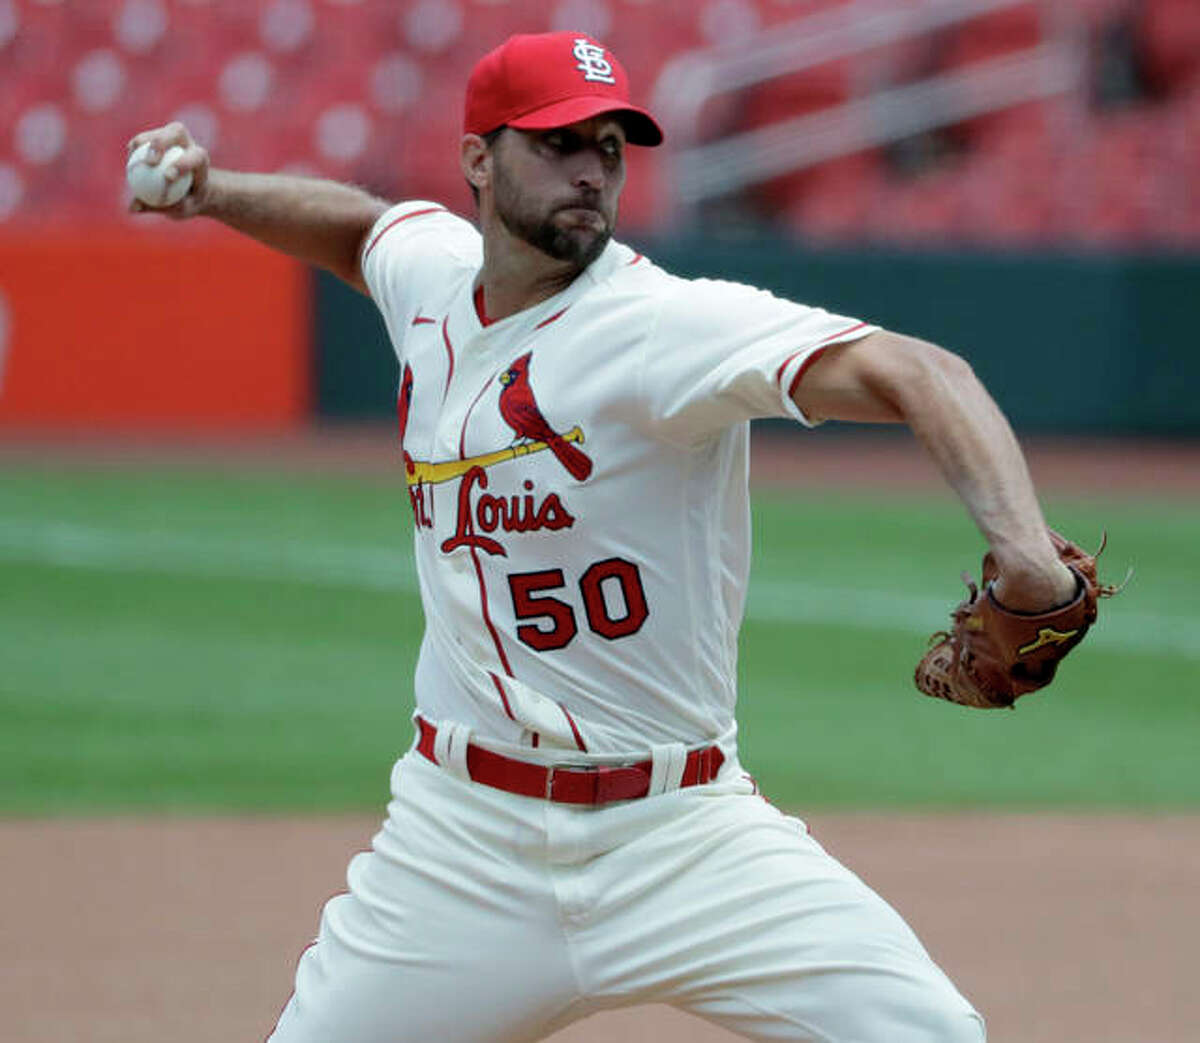 Cardinals starting pitcher Adam Wainwright throws during the fourth inning against the Pittsburgh Pirates on Saturday at Busch Stadium.